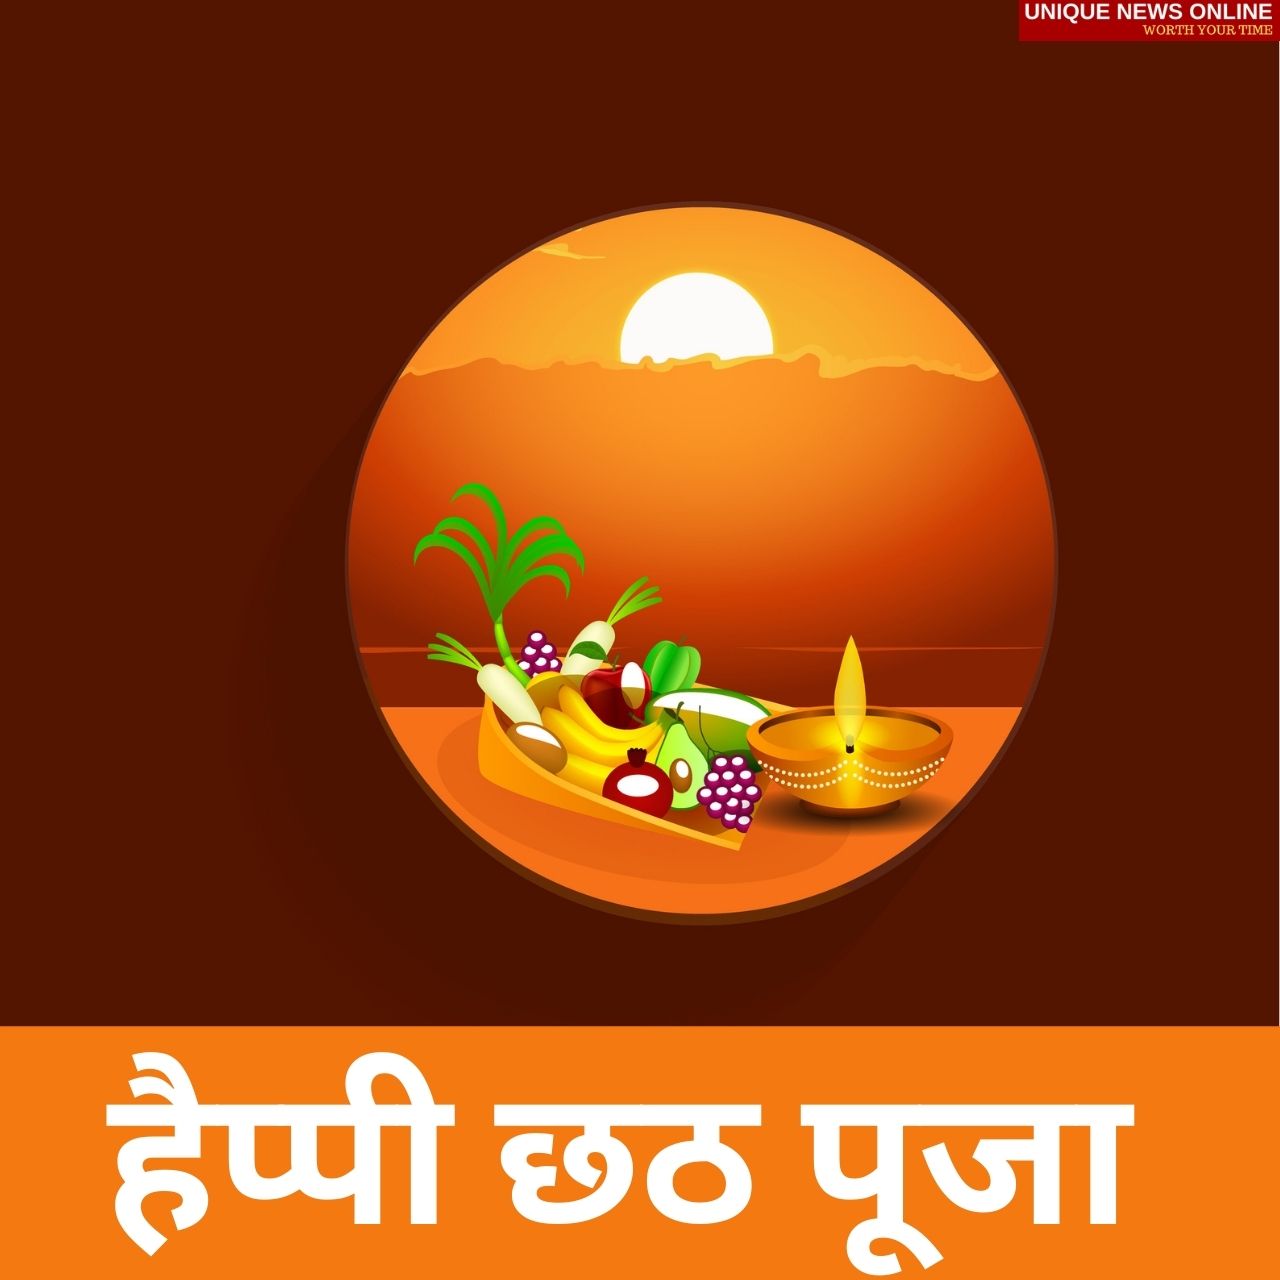 Chhath Puja 2021 Bhojpuri Quotes, Shayari, Wishes, Greetings, Images, and Messages to greet your Loved Ones